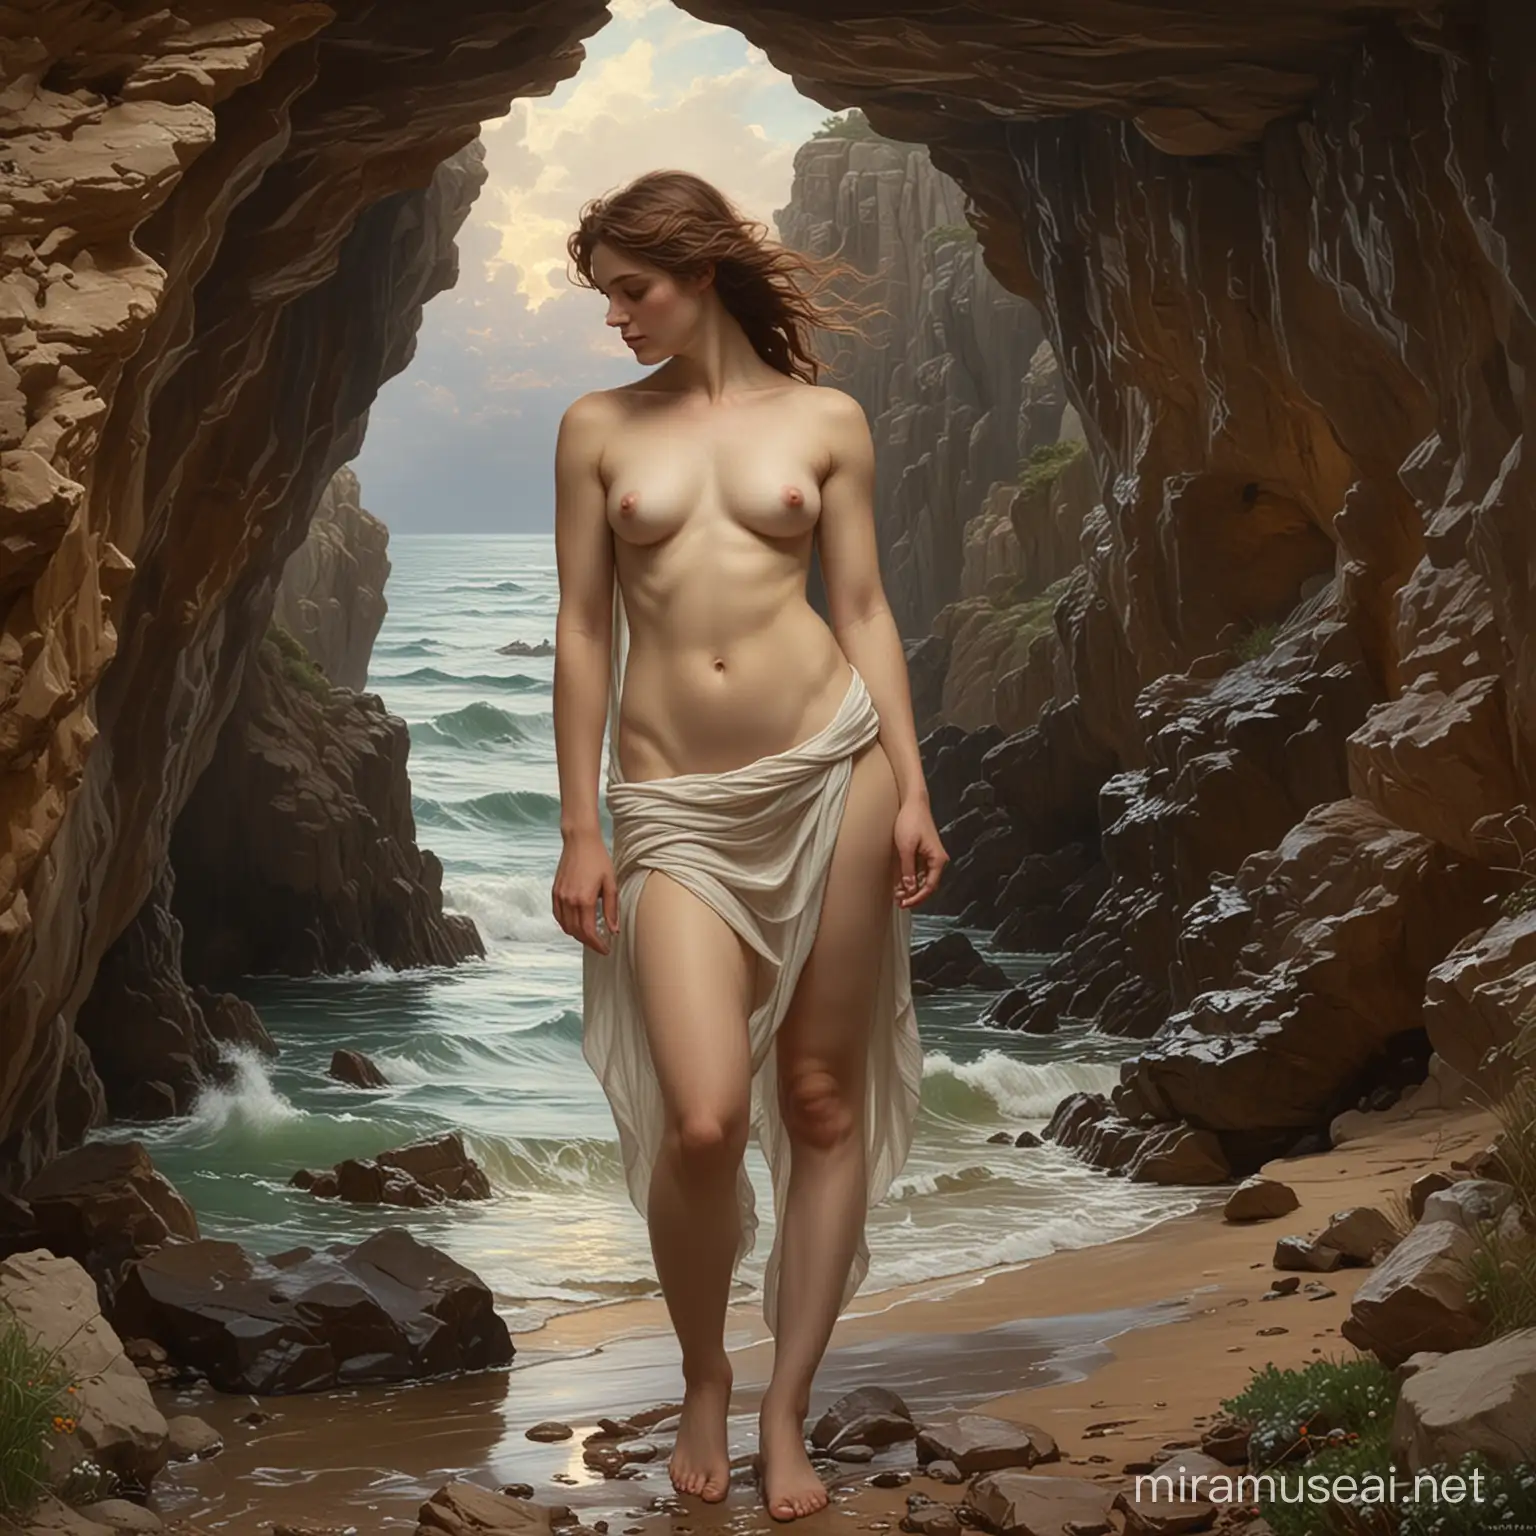 The subject of the image is the handsome Odysseus leaving the nude muse Calypso, envisioned in the artistic style of the renowned British painter, Sir John William Waterhouse. The muse Calypso is depicted in a cave on a seaside hill above the shore, embodying the essence of calm weather after a storm which still lingers on the horizon. She is positioned in a graceful pose feeling sad because Odysseus has decided to return to his homeland.  The natural contours of her beautiful body highlight the delicate balance between vulnerability and empowerment.
